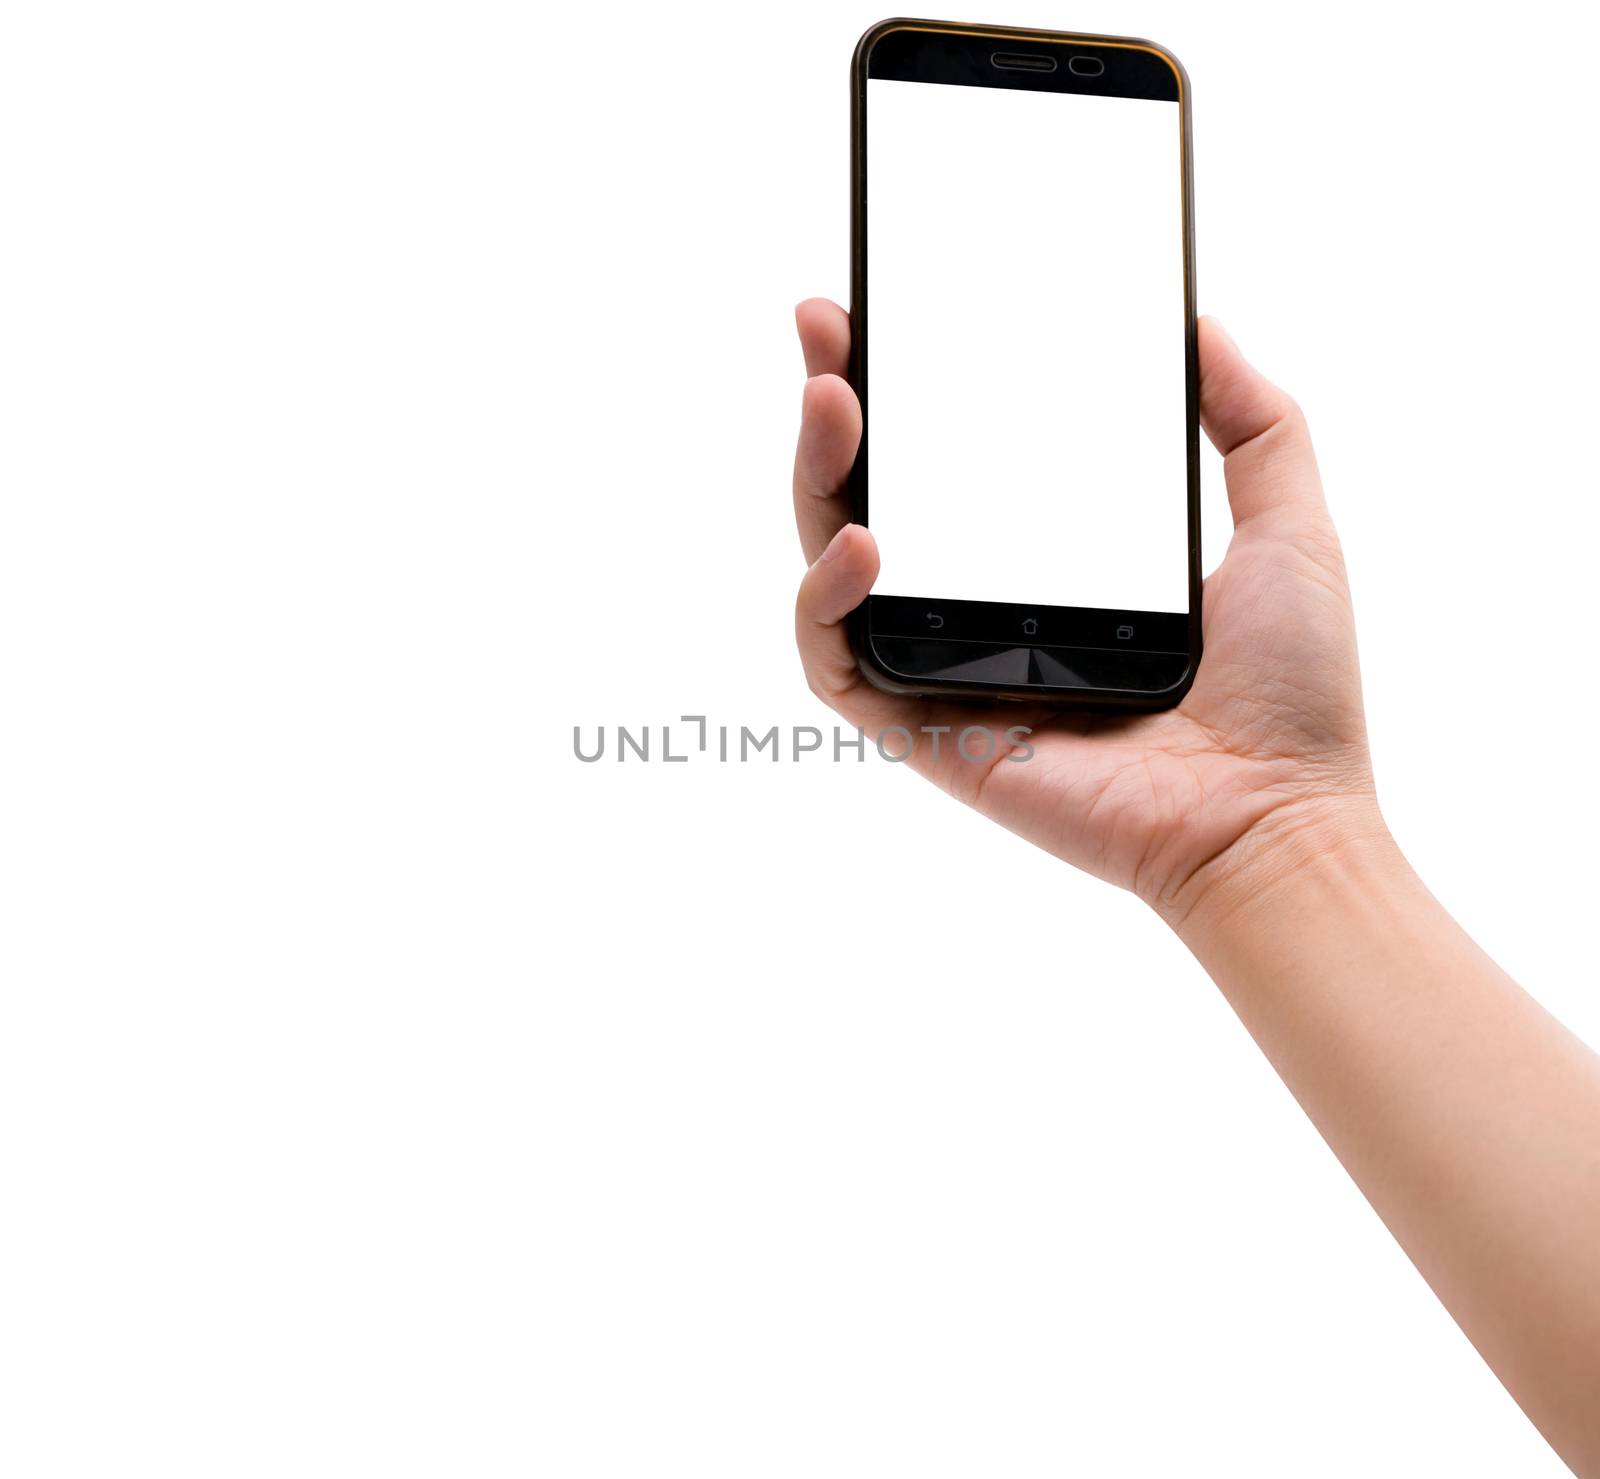 Asian people right hand holding empty screen phone and using smart phone selfie photo isolated on white background with clipping path by Fahroni